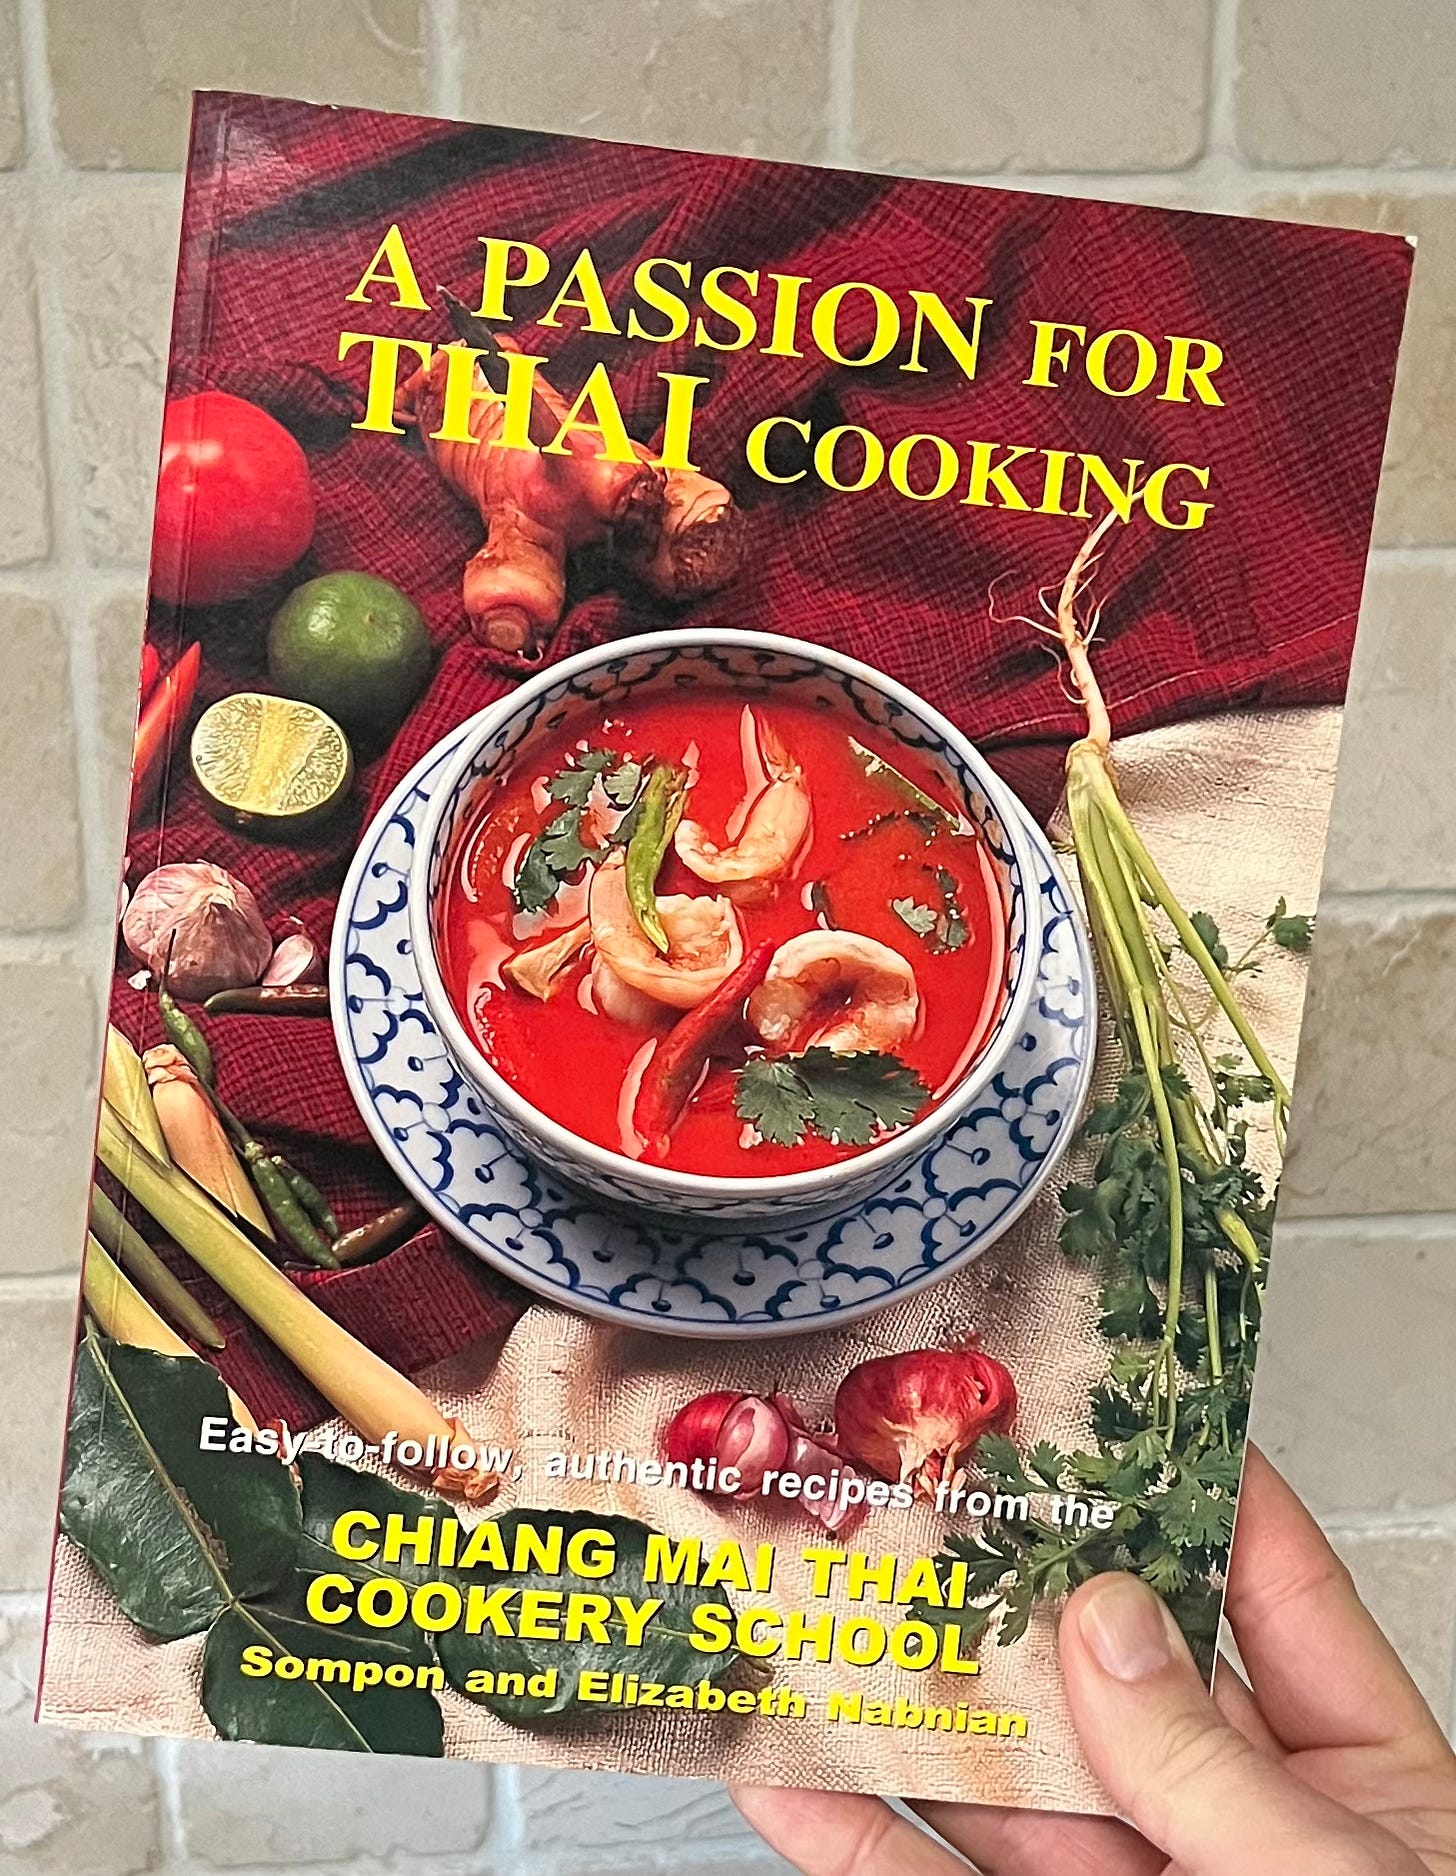 A photo of a book entitled A passion for Thai cooking